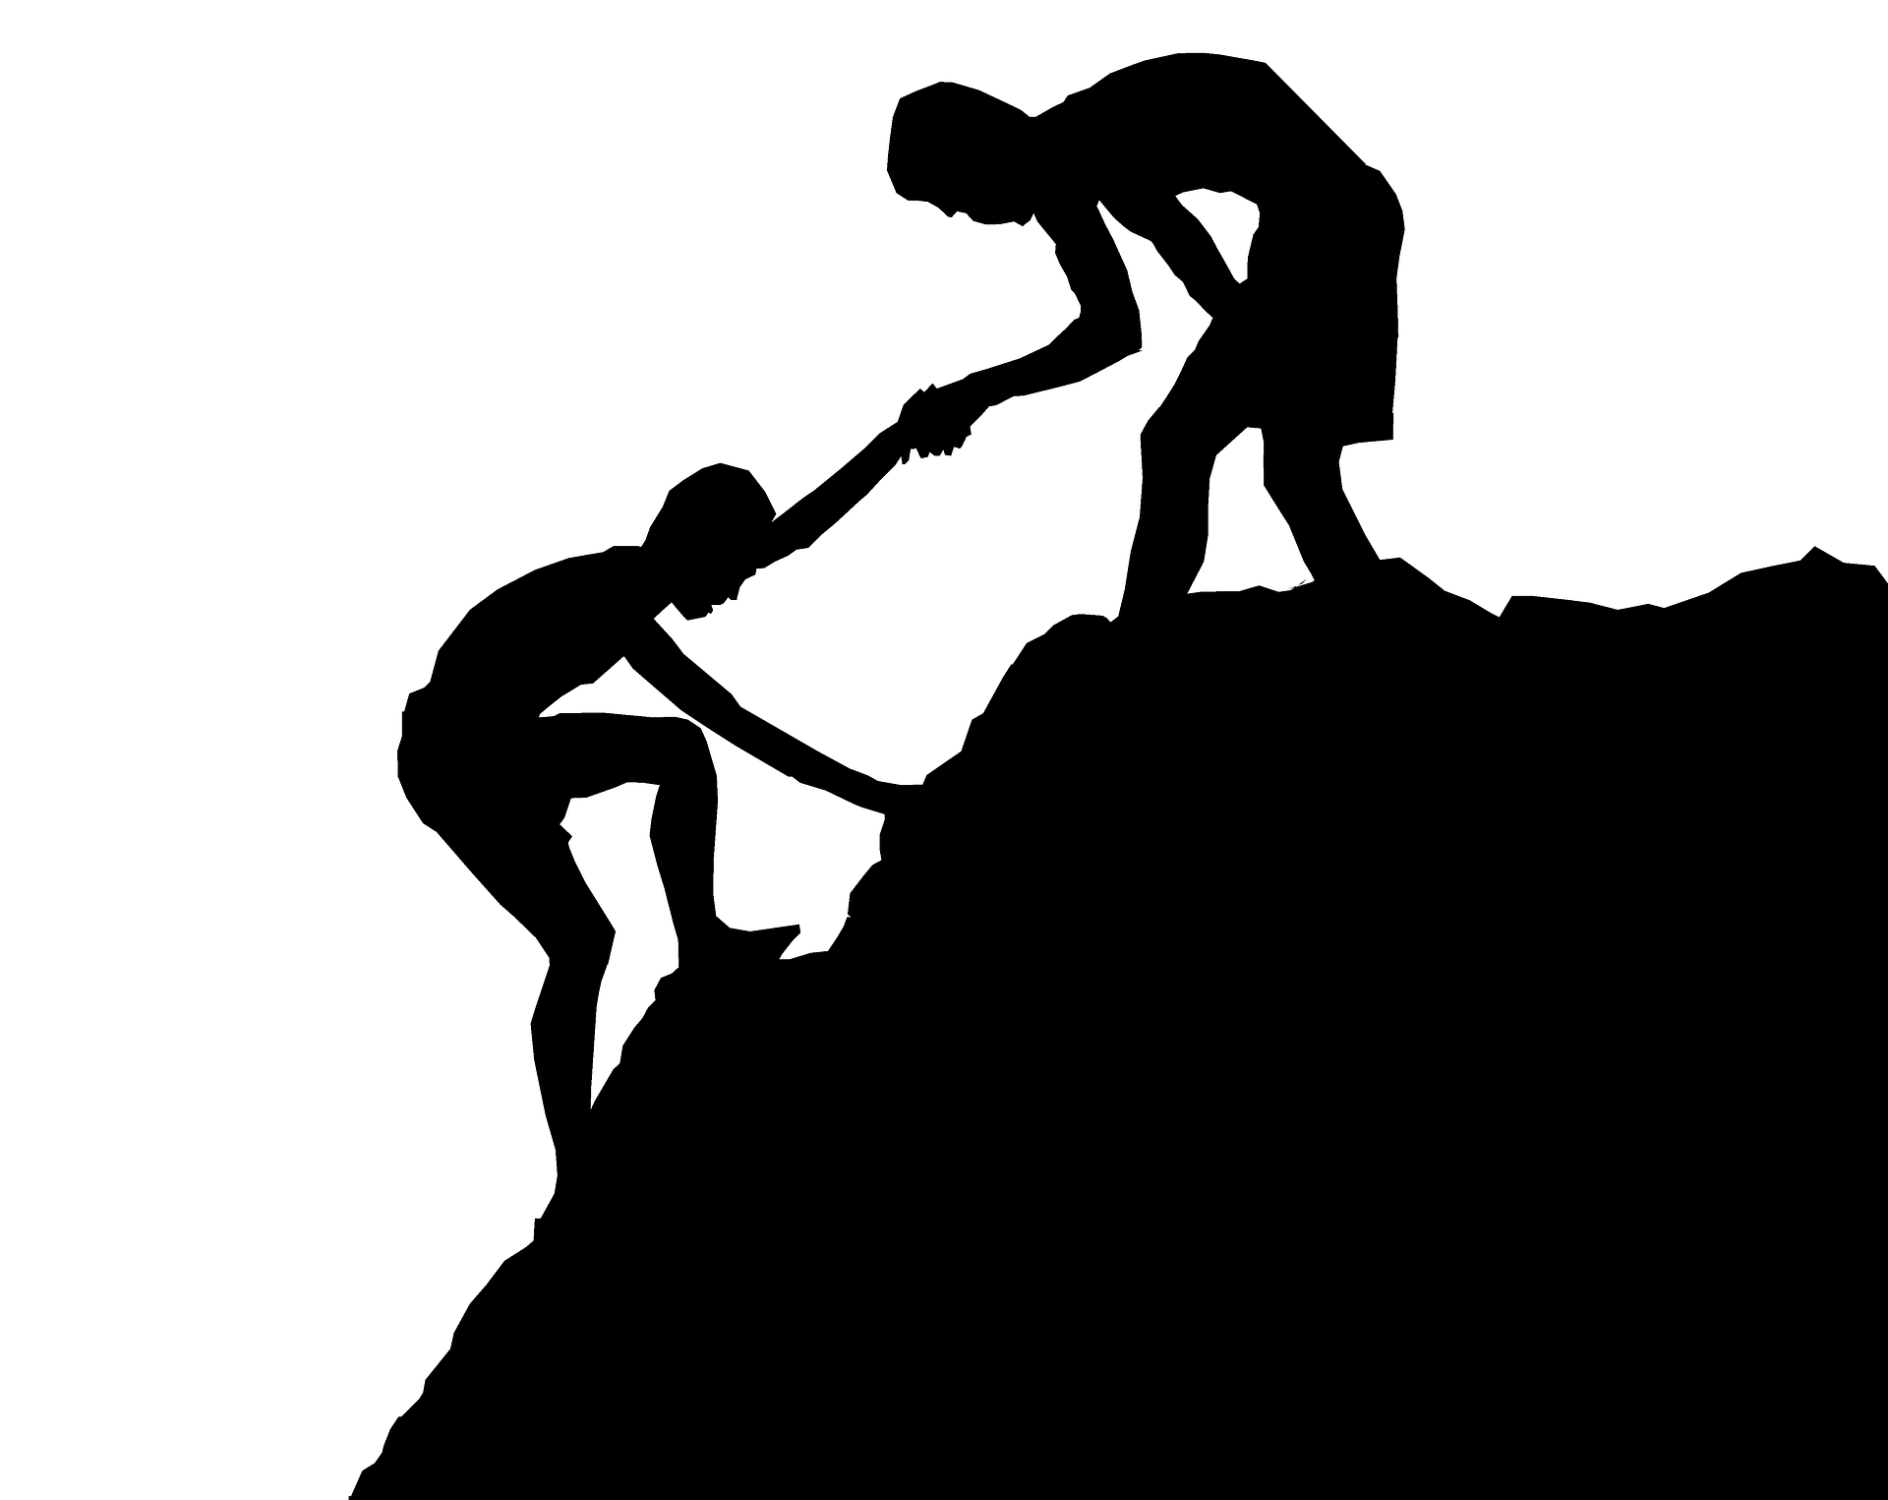 One person helping another up on a mountain https://pixabay.com/nl/users/tumisu-148124/?utm_source=link-attribution&amp;utm_medium=referral&amp;utm_campaign=image&amp;utm_content=2444110